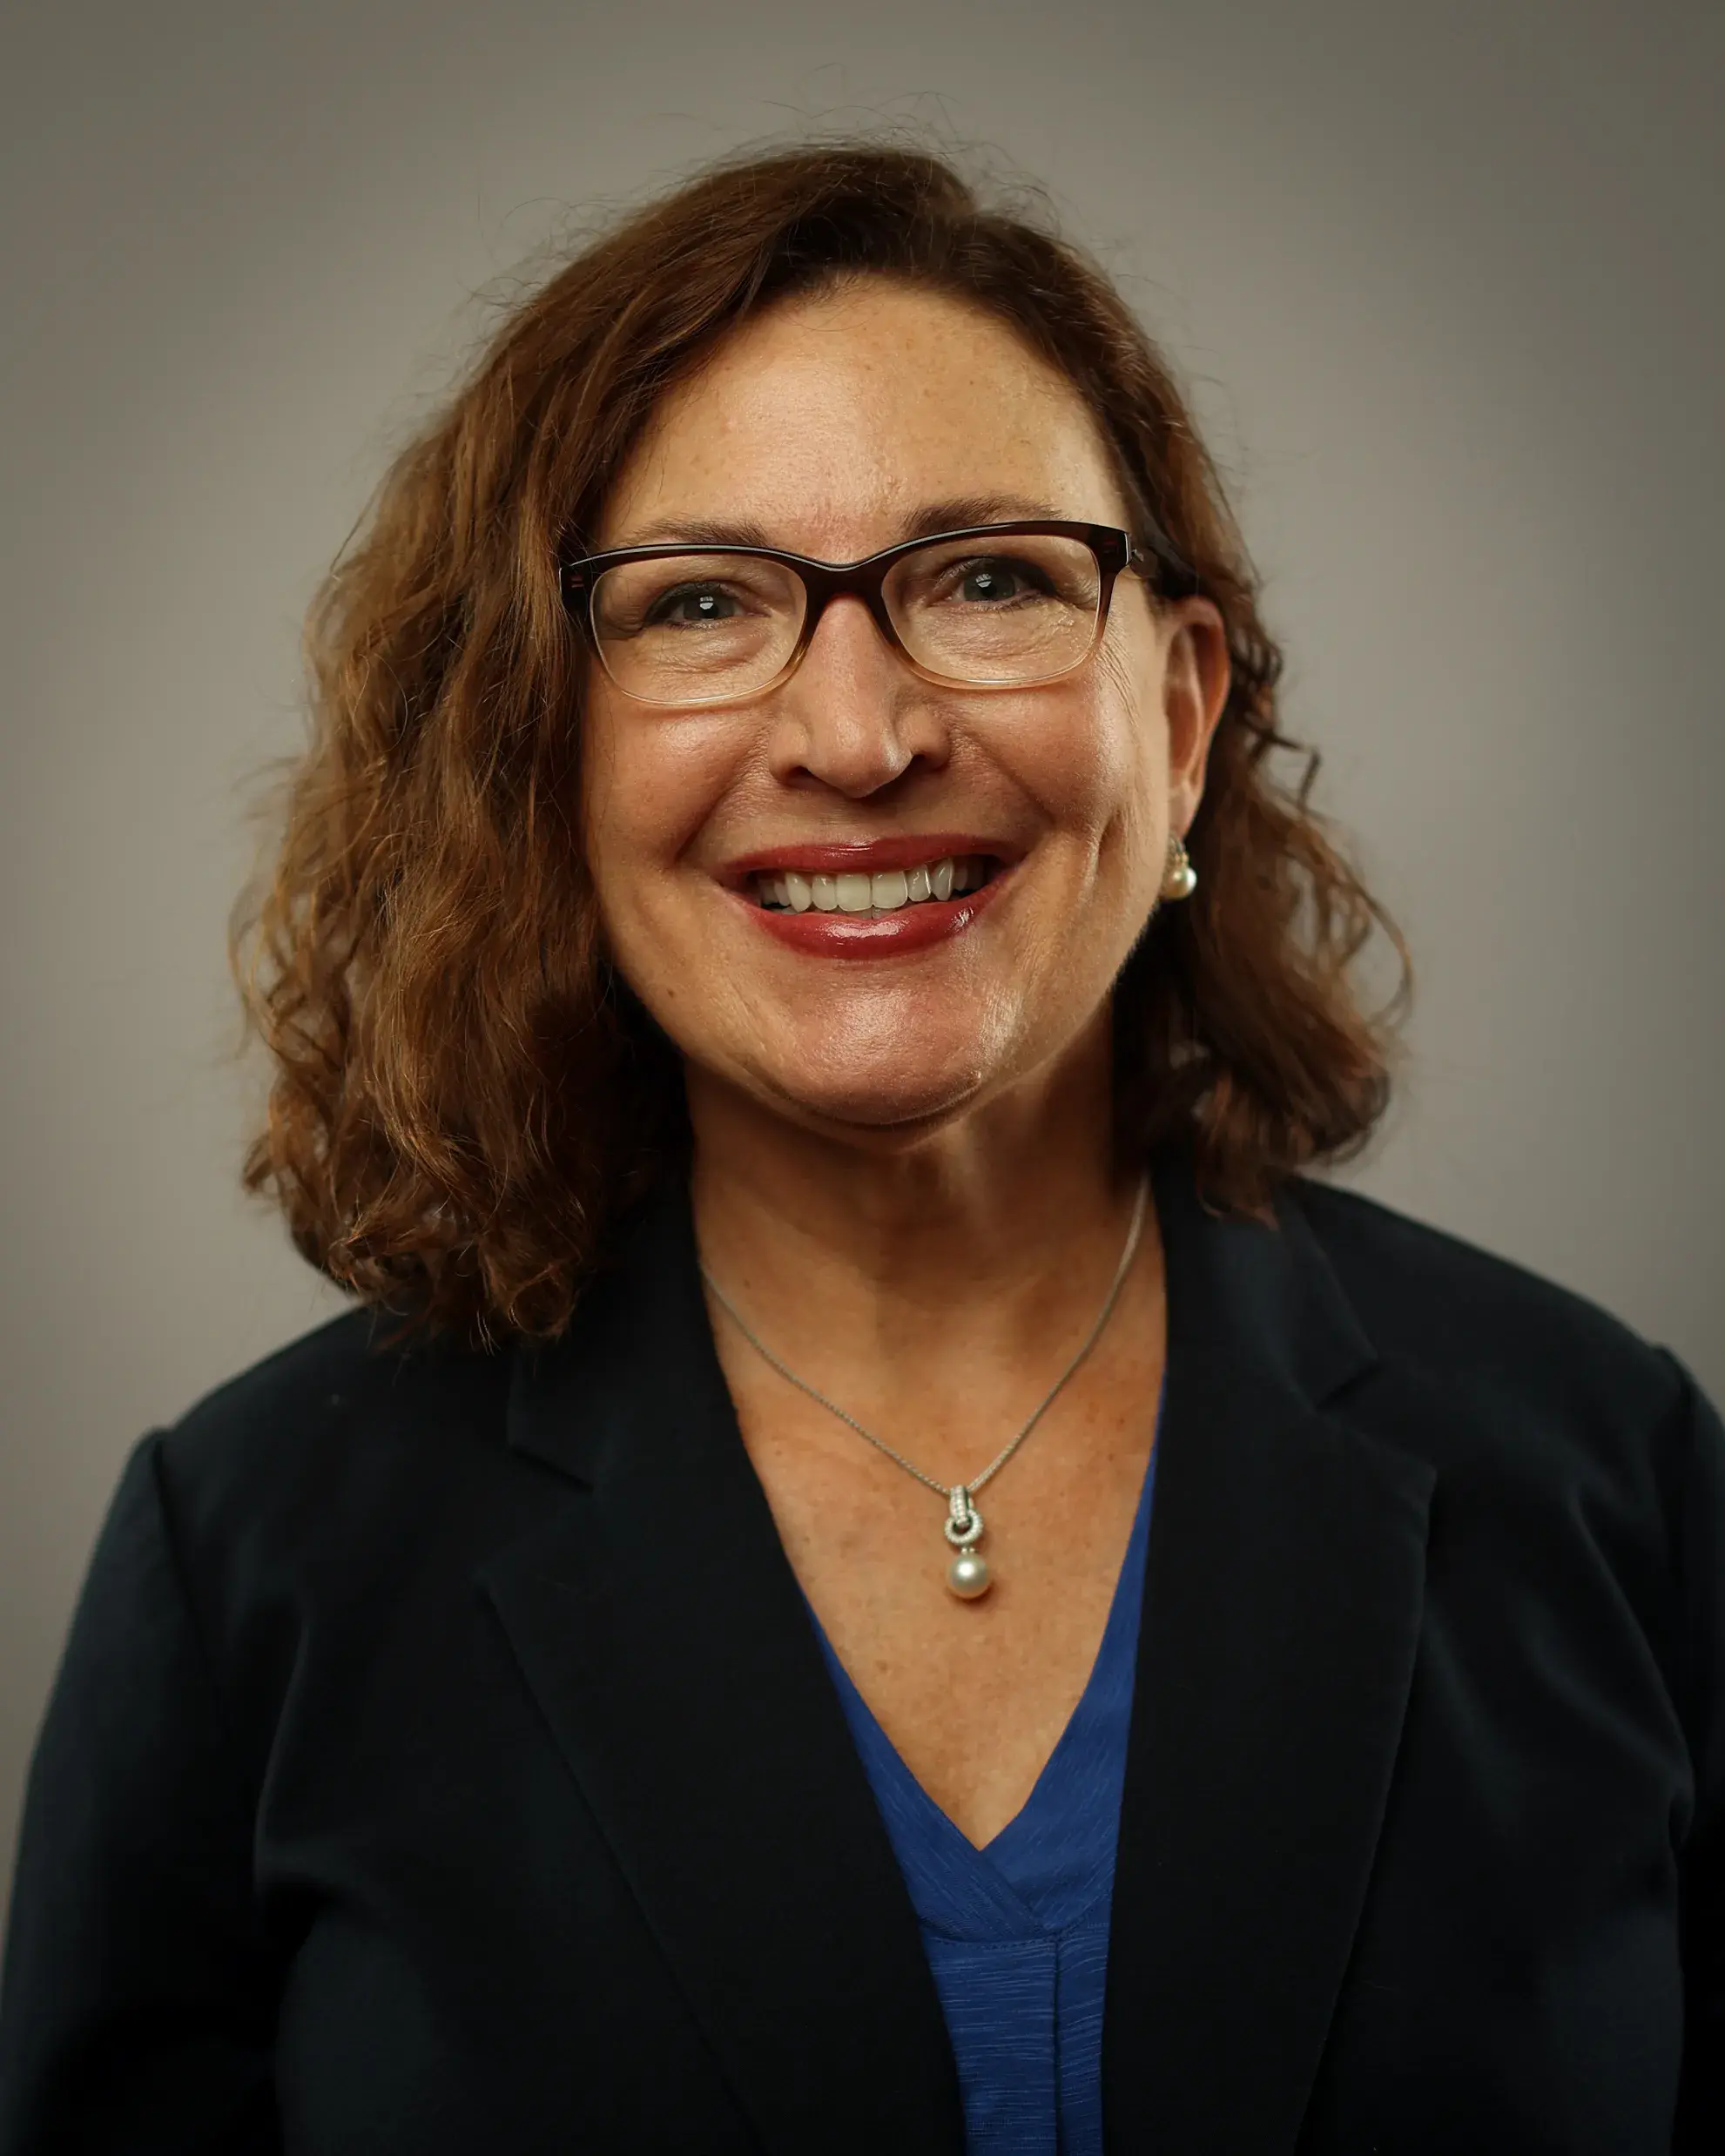 Marcy Deaton, Senior Associate General Counsel